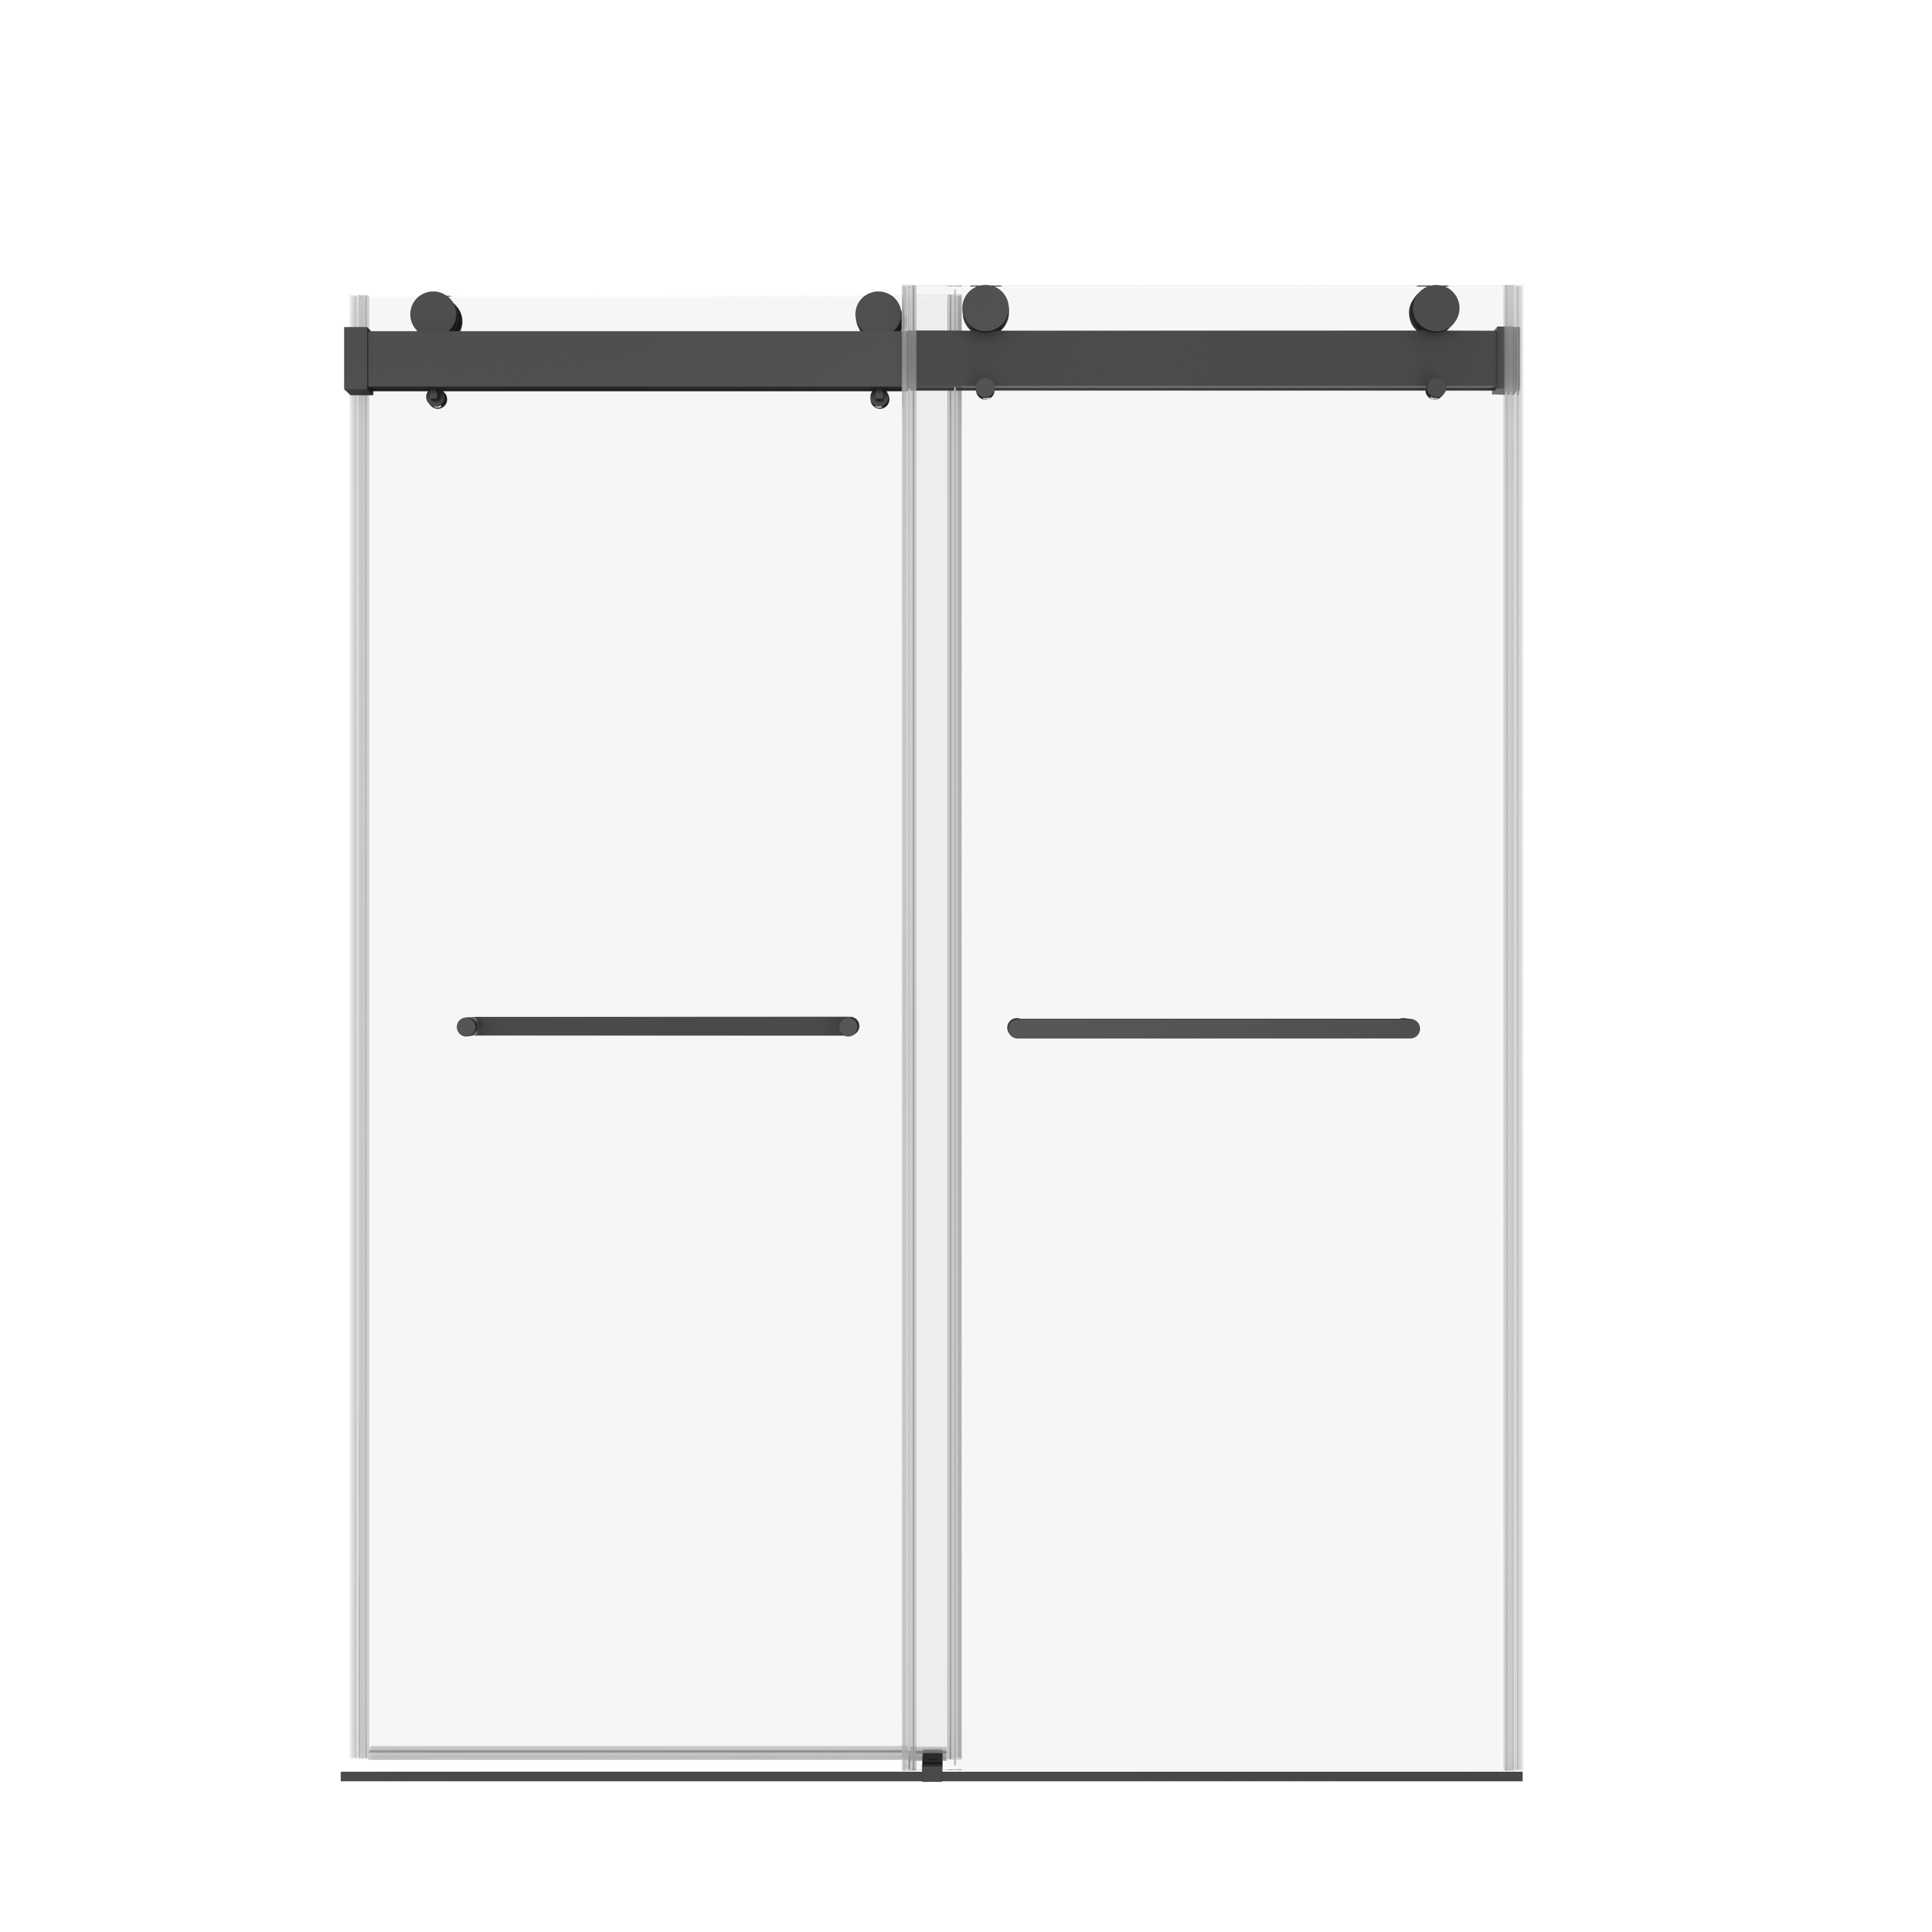 72" W x 76" H Double Sliding Frameless Soft-Close Shower Door with Premium 3/8 Inch